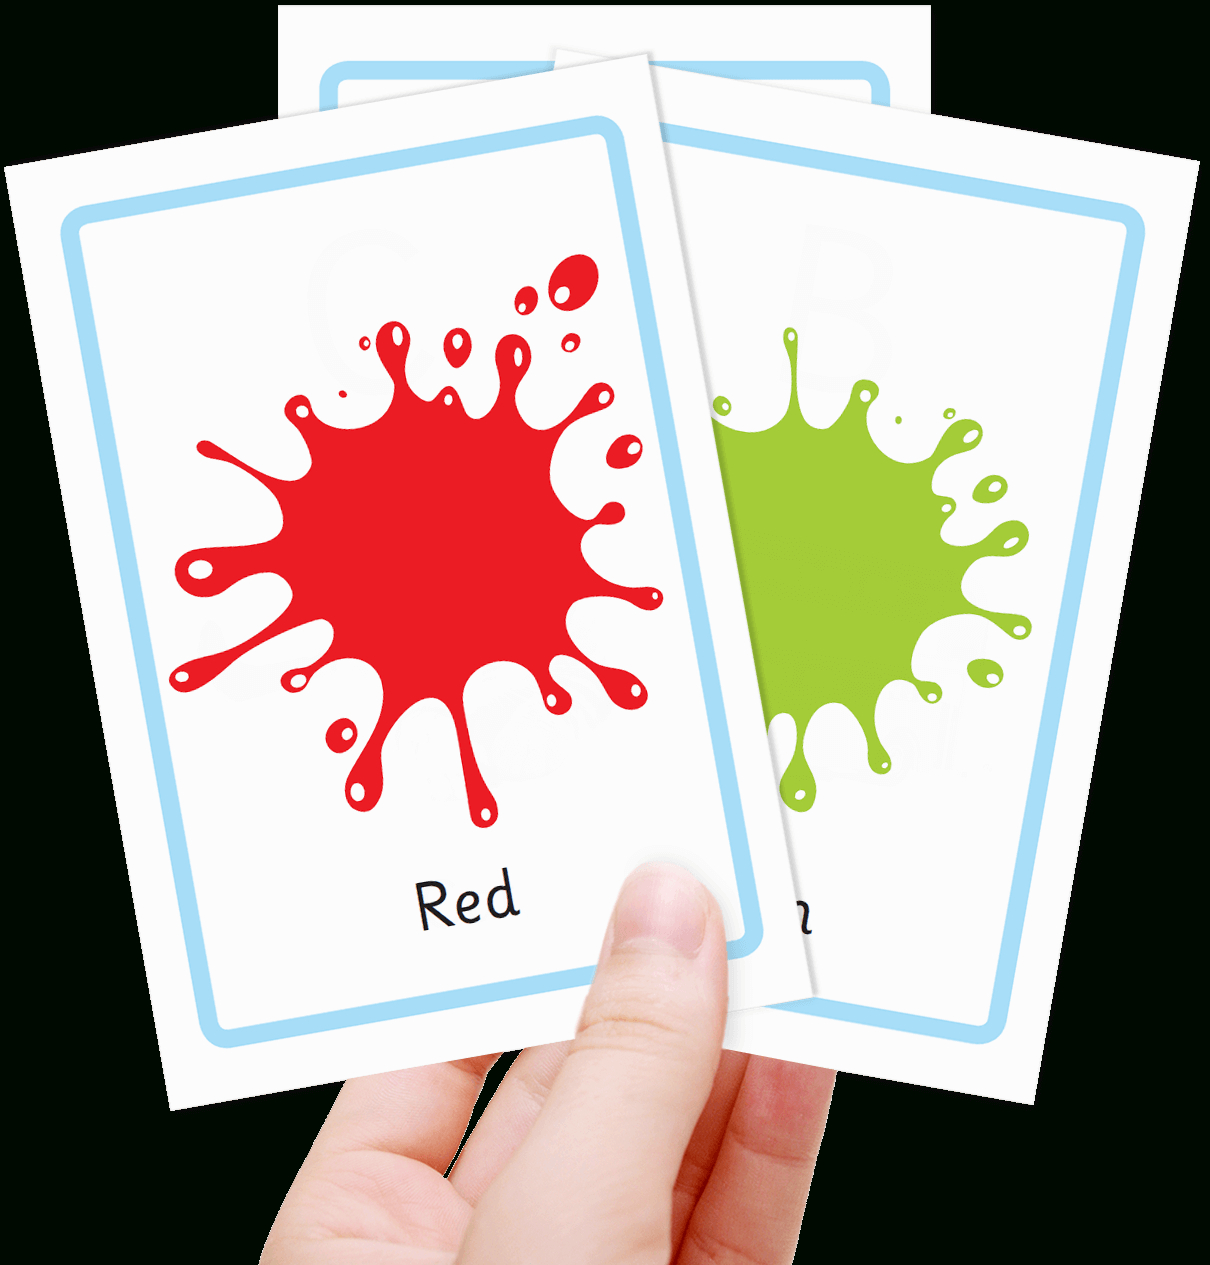 Free Colour Flashcards For Kids - Totcards - Free Printable Colour Flashcards